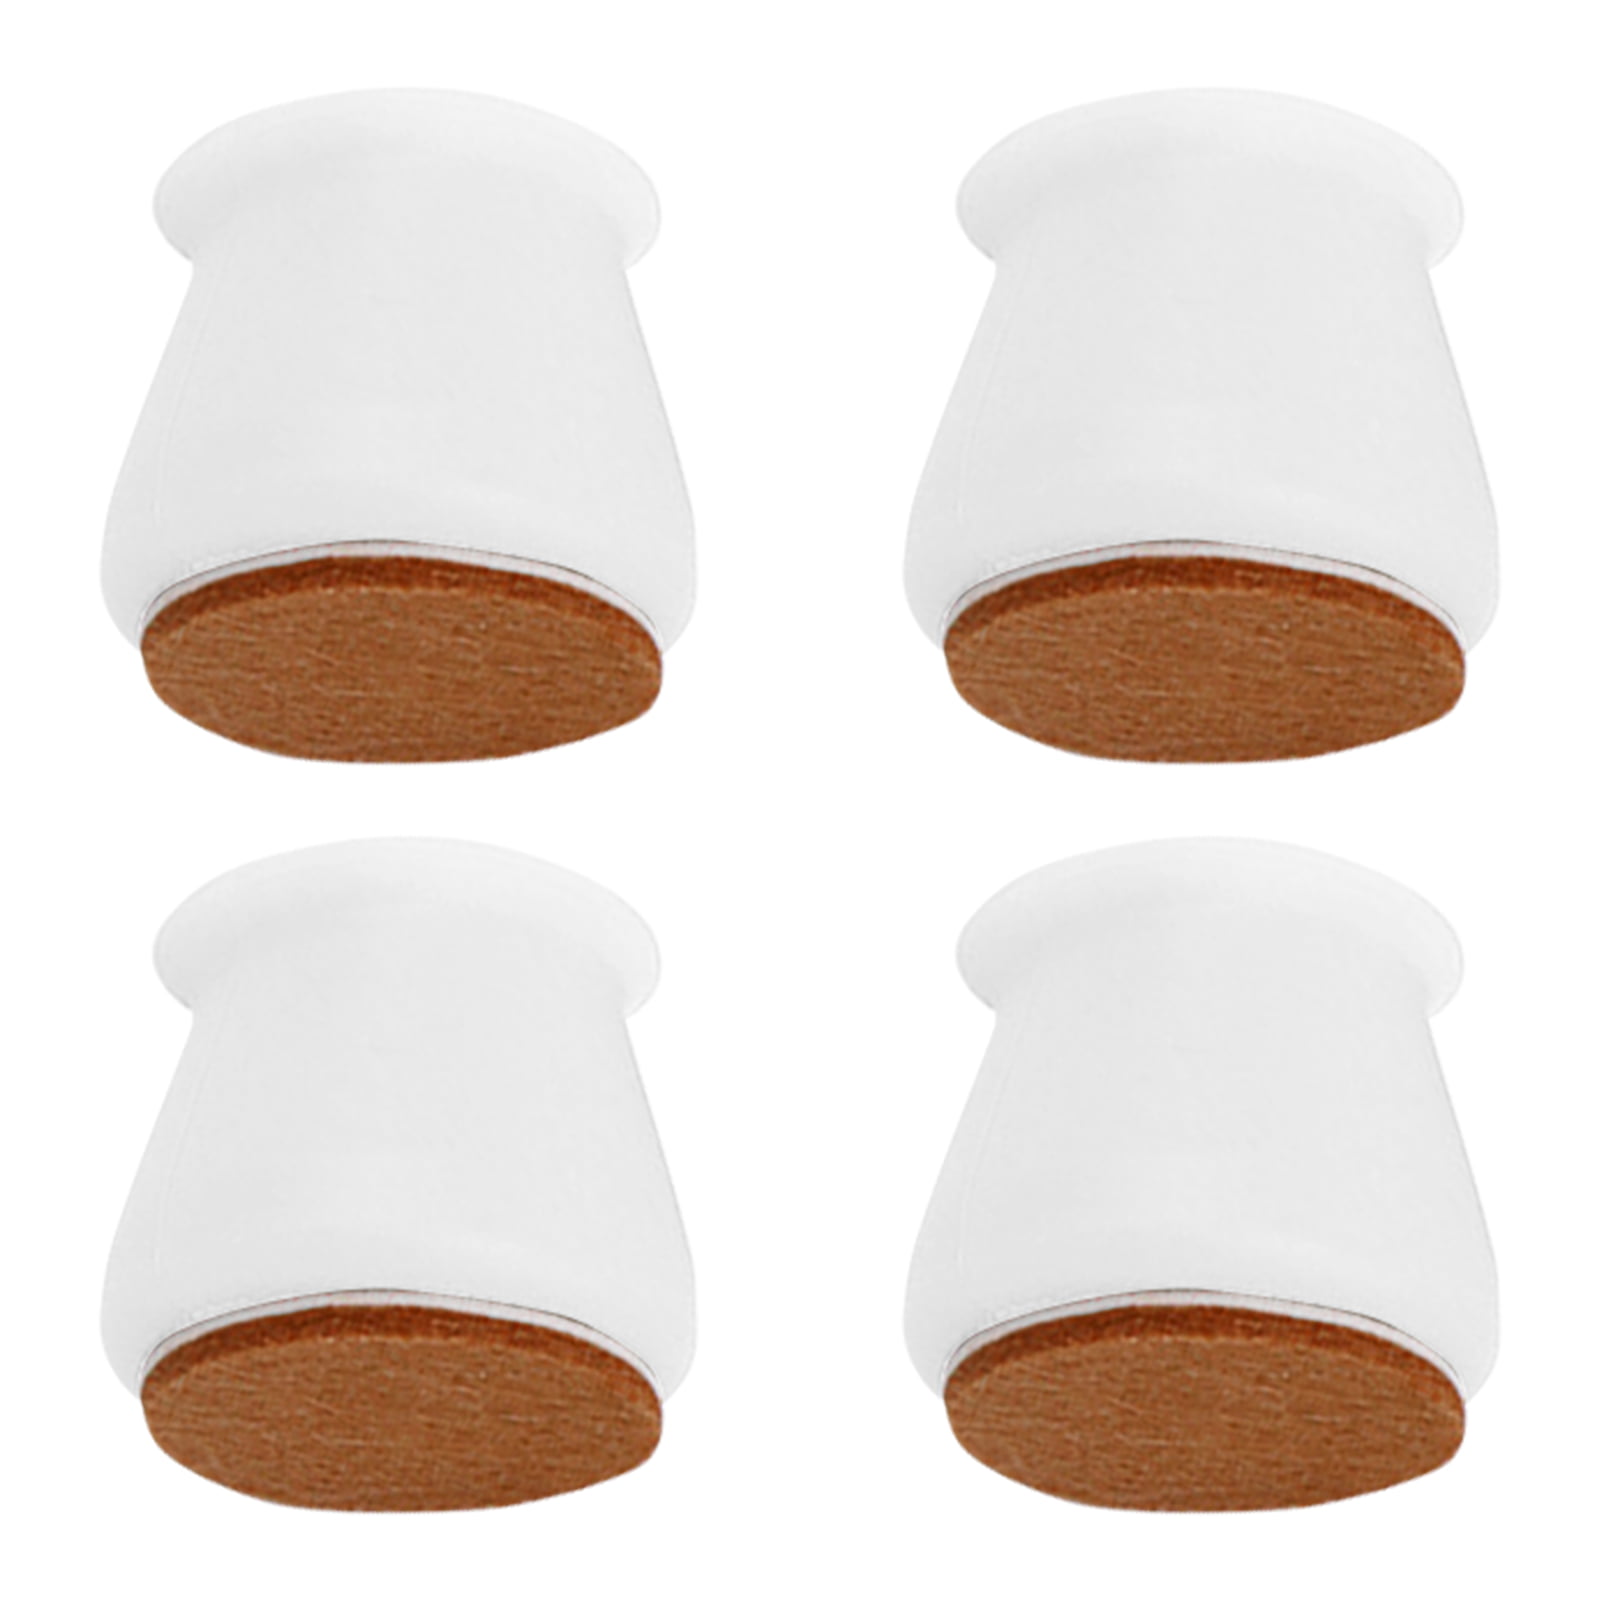 Details about   4pcs Silicone Felt Table Chair Foot Protective Cover Home Floor Protector Set ^& 